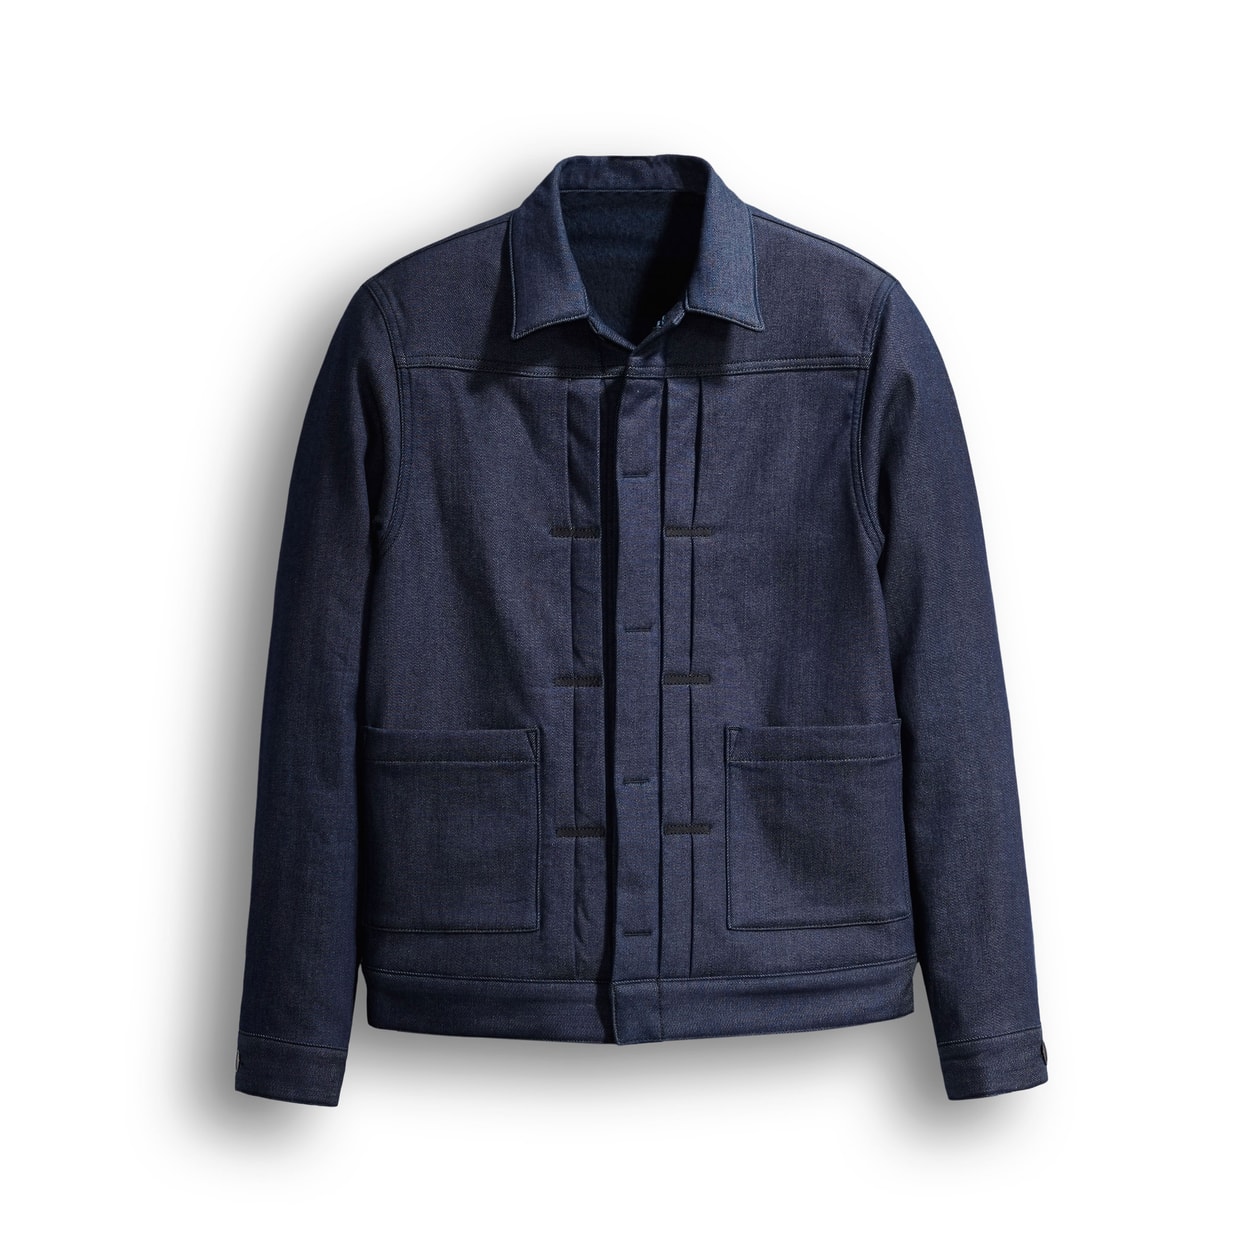 Levi’s Made & Crafted Pile Trucker Jacket